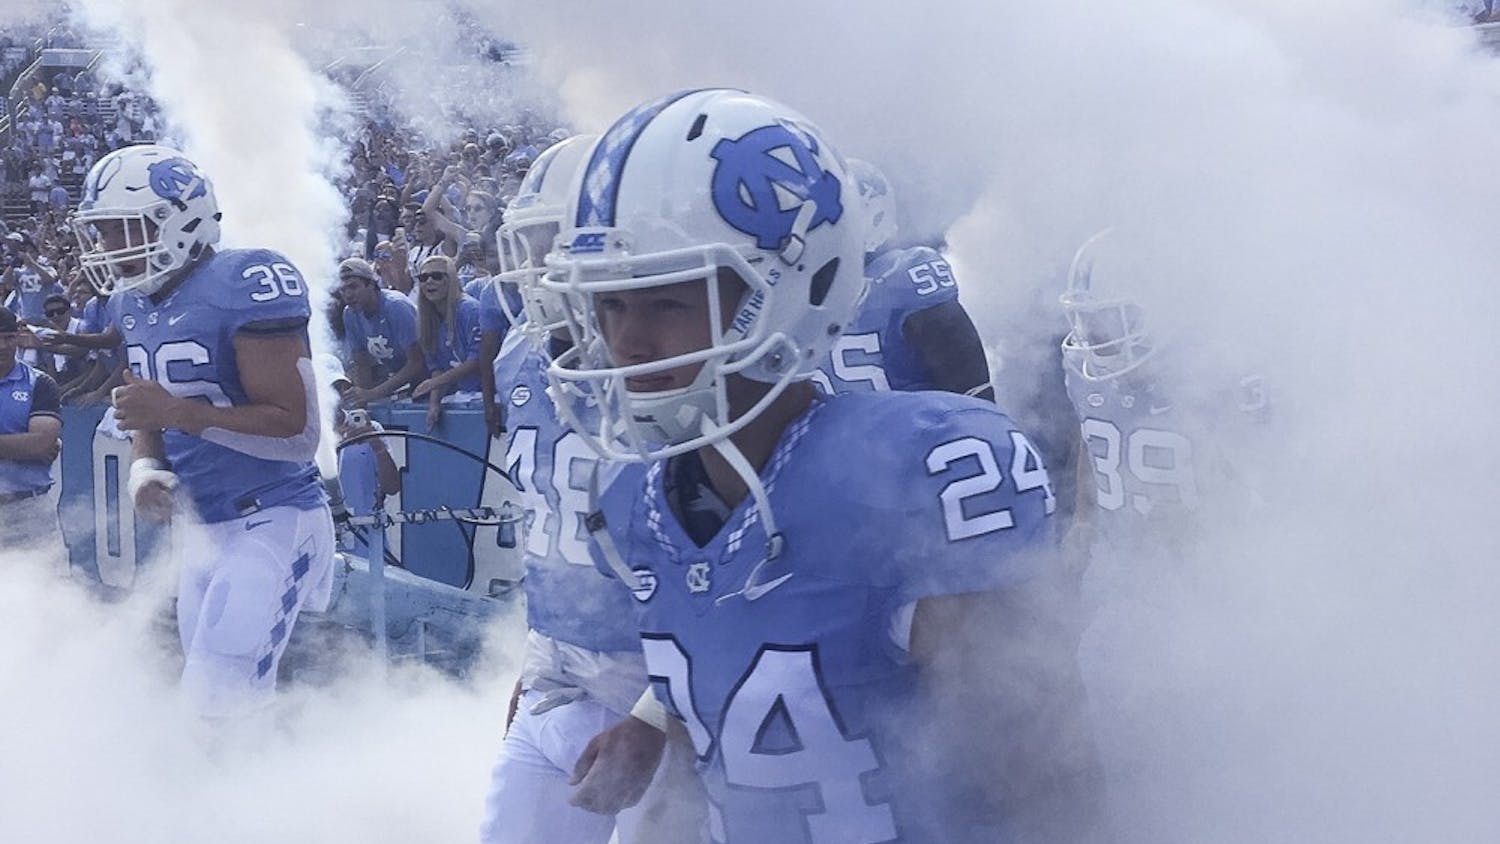 North Carolina defensive back Zach Goins (24) prepares to run out of the smoke filled tunnel. Photo Courtesy of Zach Goins.